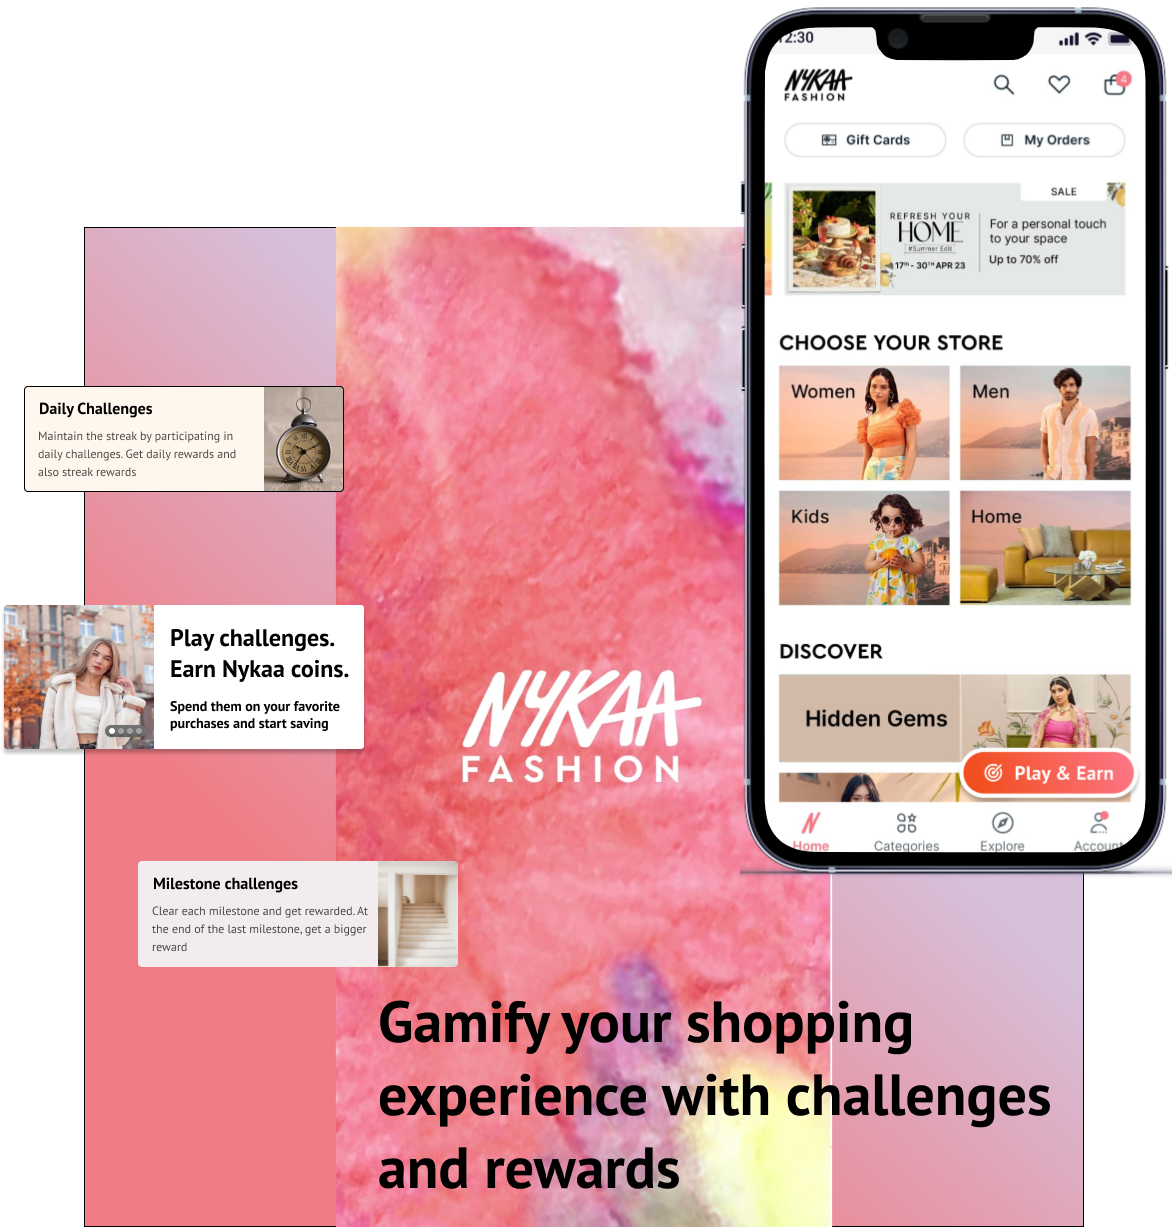 Gamifying the shopping experience by introducing challenges in the Nykaa  Fashion app, by Moksha Shah